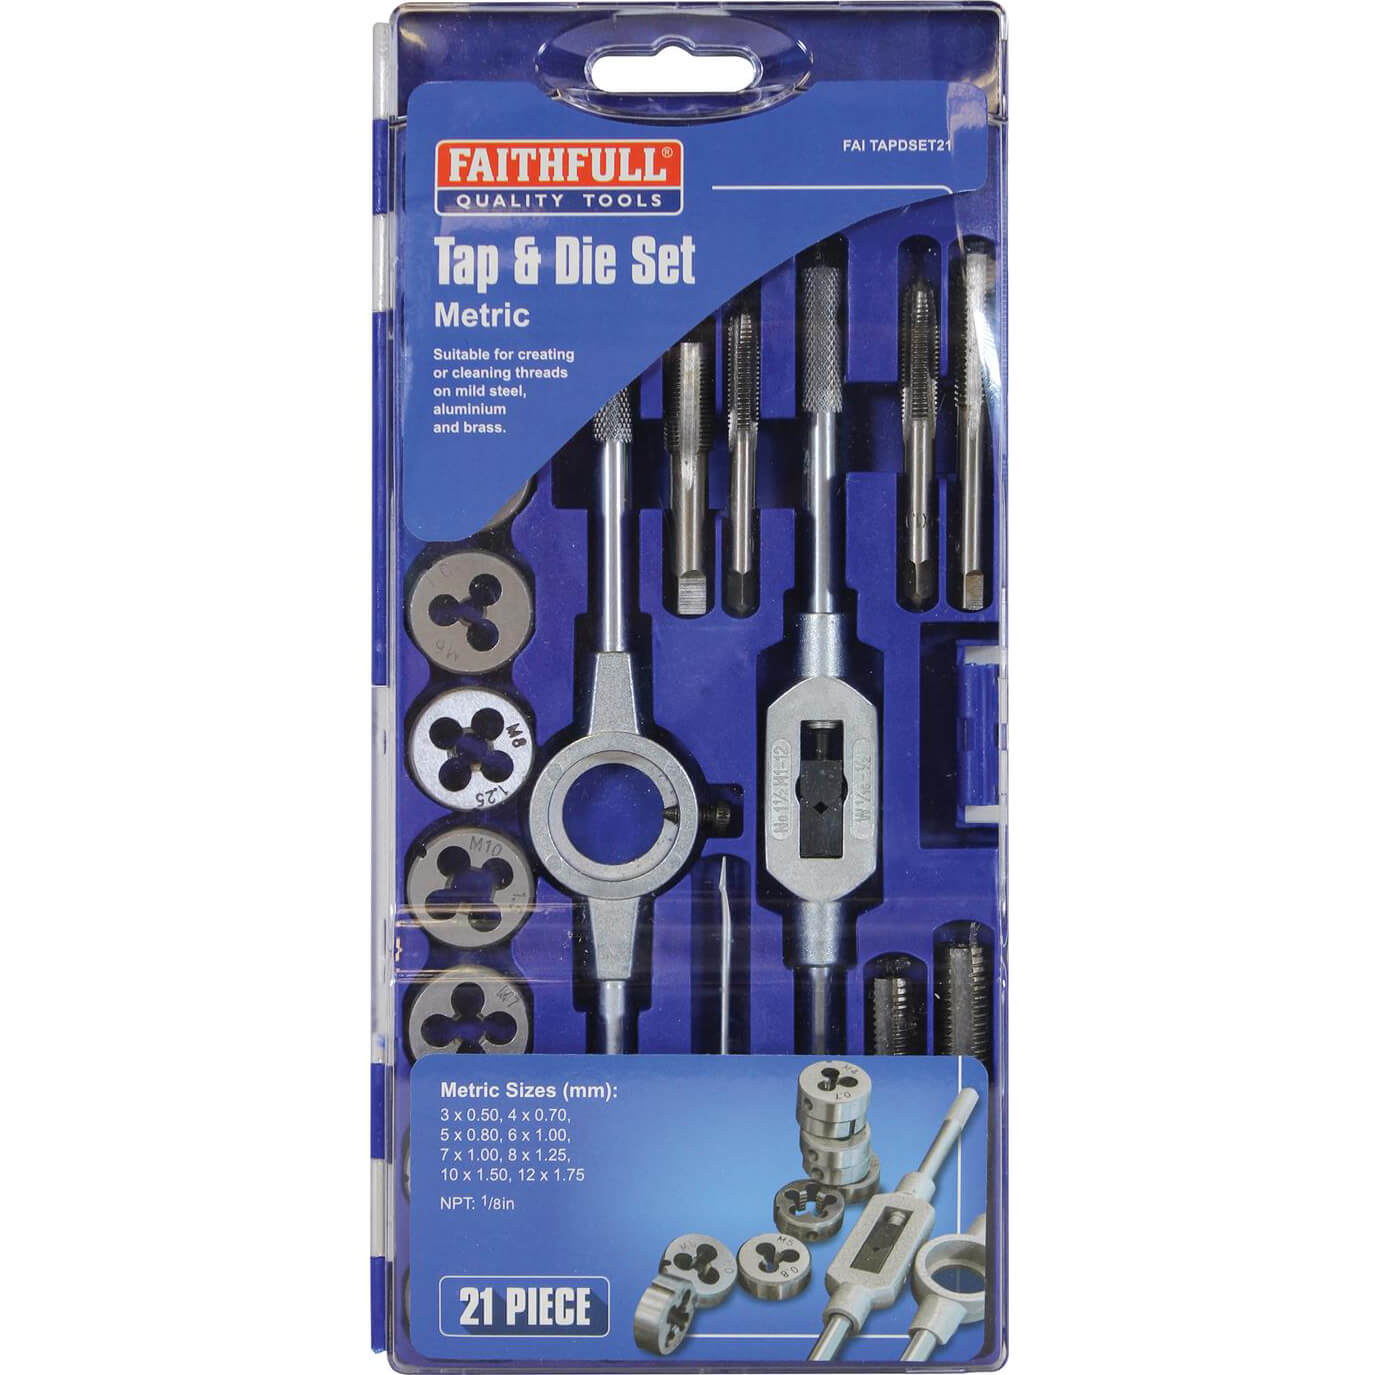 Image of Faithfull 21 Piece Carbon Steel Tap and Die Set Metric